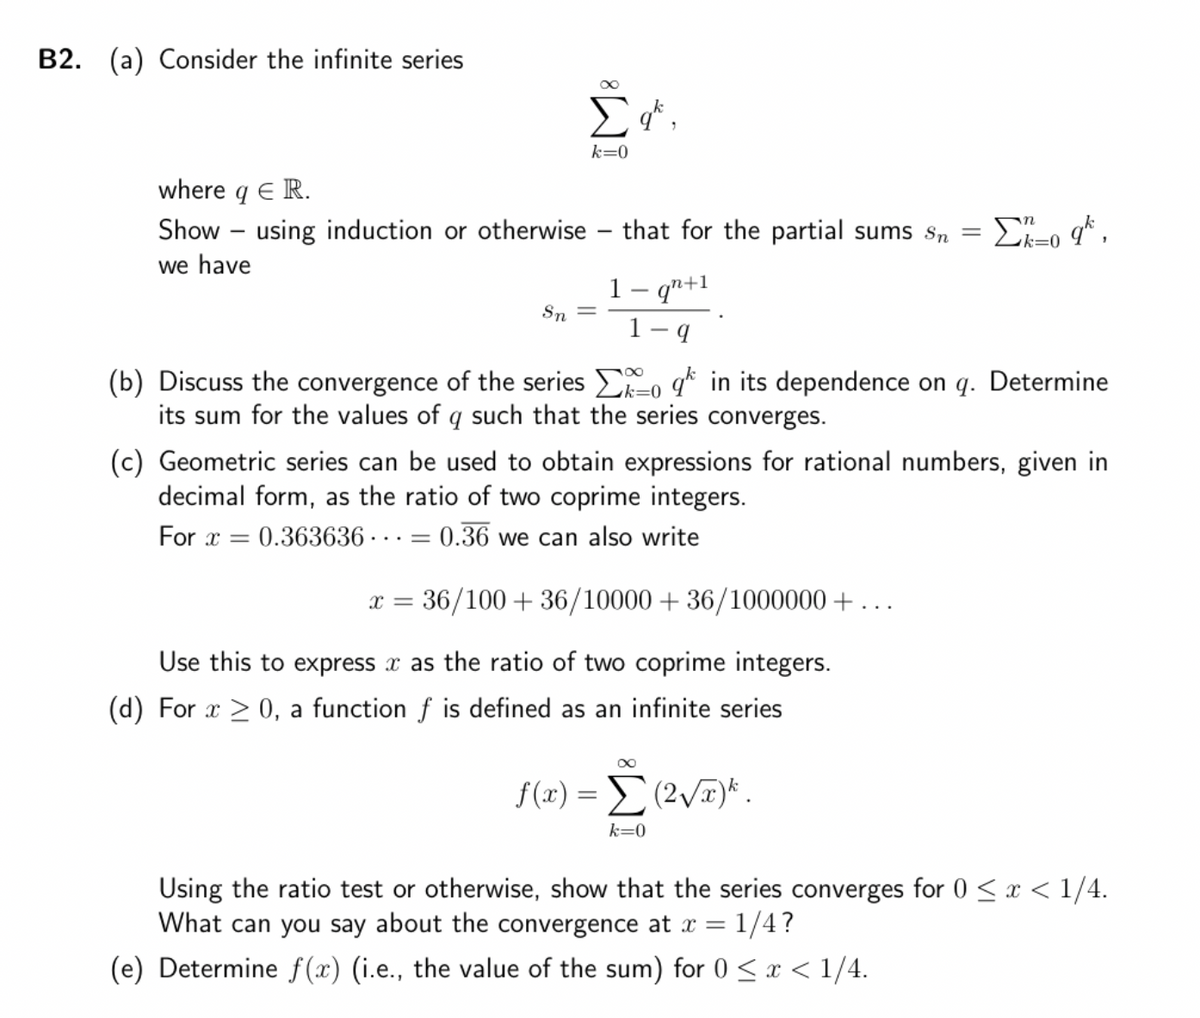 B2. (a) Consider the infinite series
where q E R.
=
Show - using induction or otherwise - that for the partial sums sn
we have
Σat,
k=0
Sn
...=
1- qn+1
9
(b) Discuss the convergence of the series
its sum for the values of q such that the series converges.
in its dependence on q. Determine
(c) Geometric series can be used to obtain expressions for rational numbers, given in
decimal form, as the ratio of two coprime integers.
For x = 0.363636. 0.36 we can also write
Σ=o q*,
k=0
x = = 36/100 + 36/10000+36/1000000+.
Use this to express x as the ratio of two coprime integers.
(d) For x ≥ 0, a function f is defined as an infinite series
∞
f(x) = Σ (2v)*.
k=0
Using the ratio test or otherwise, show that the series converges for 0 < x < 1/4.
What can you say about the convergence at x = 1/4?
(e) Determine f(x) (i.e., the value of the sum) for 0 < x < 1/4.